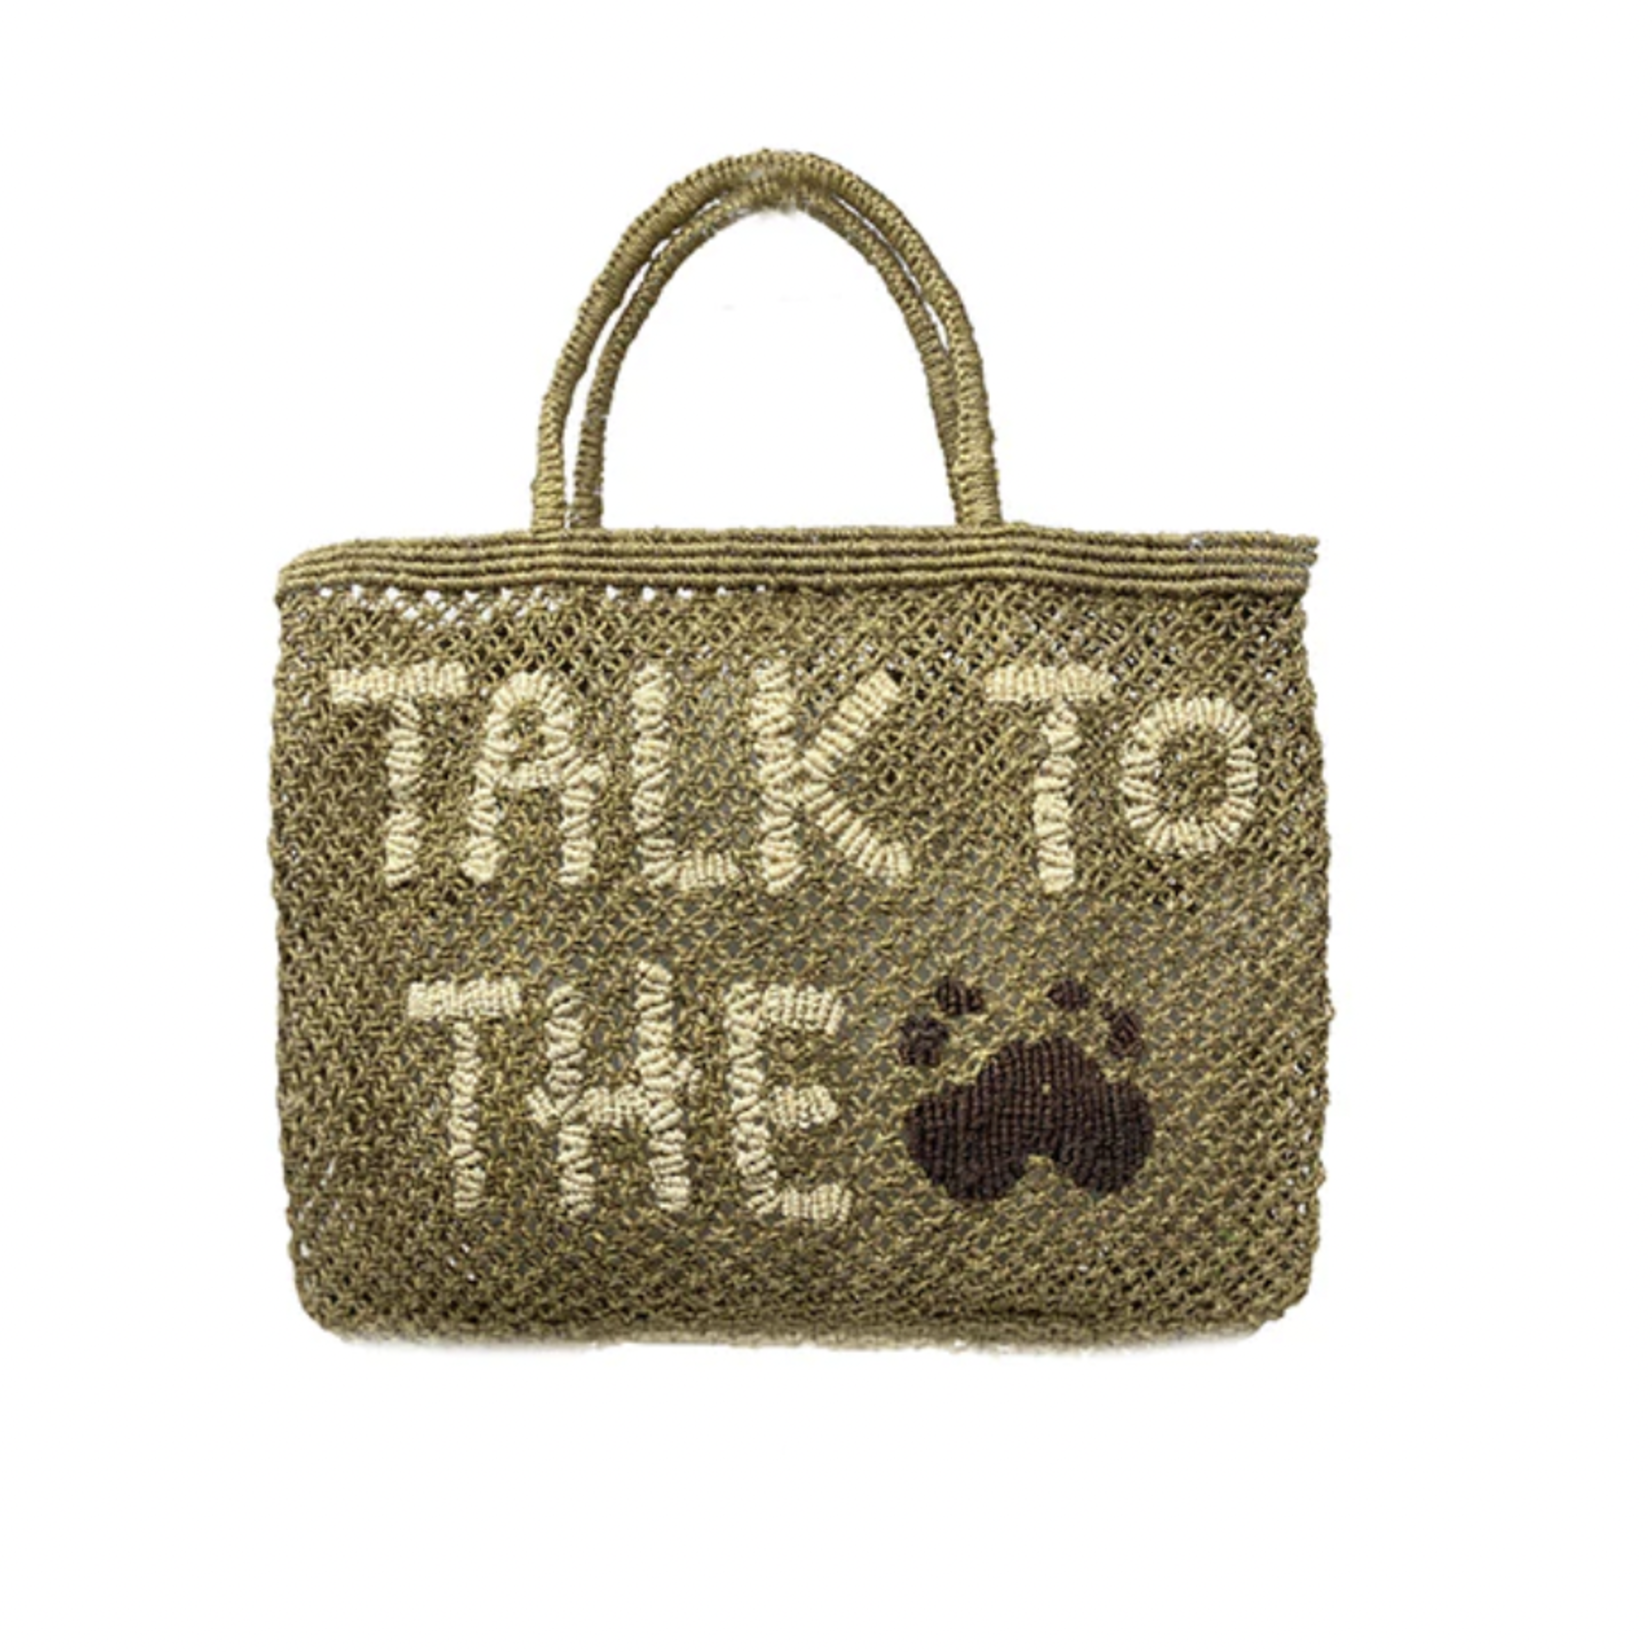 The Jacksons The Jacksons "Talk To The Paw" Tote Bag